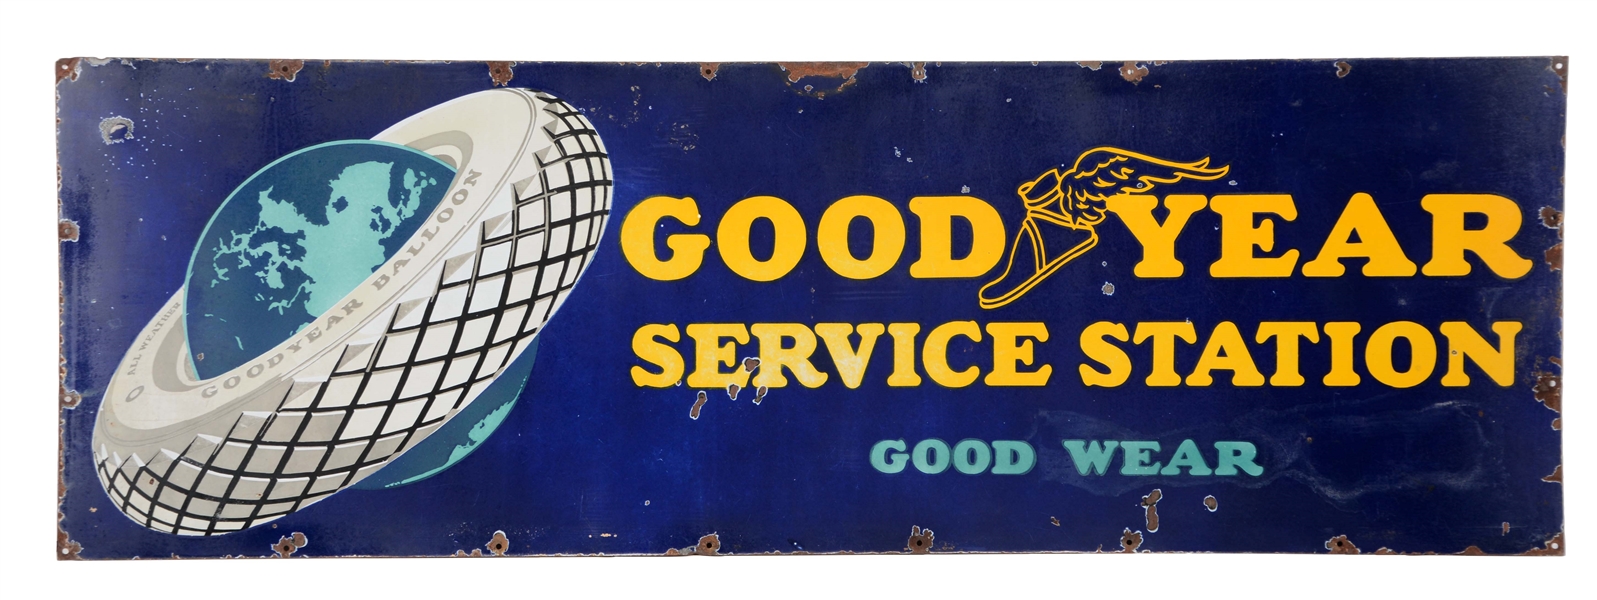 GOODYEAR TIRES SERVICE STATION PORCELAIN SIGN WITH TIRE & GLOBE GRAPHIC.